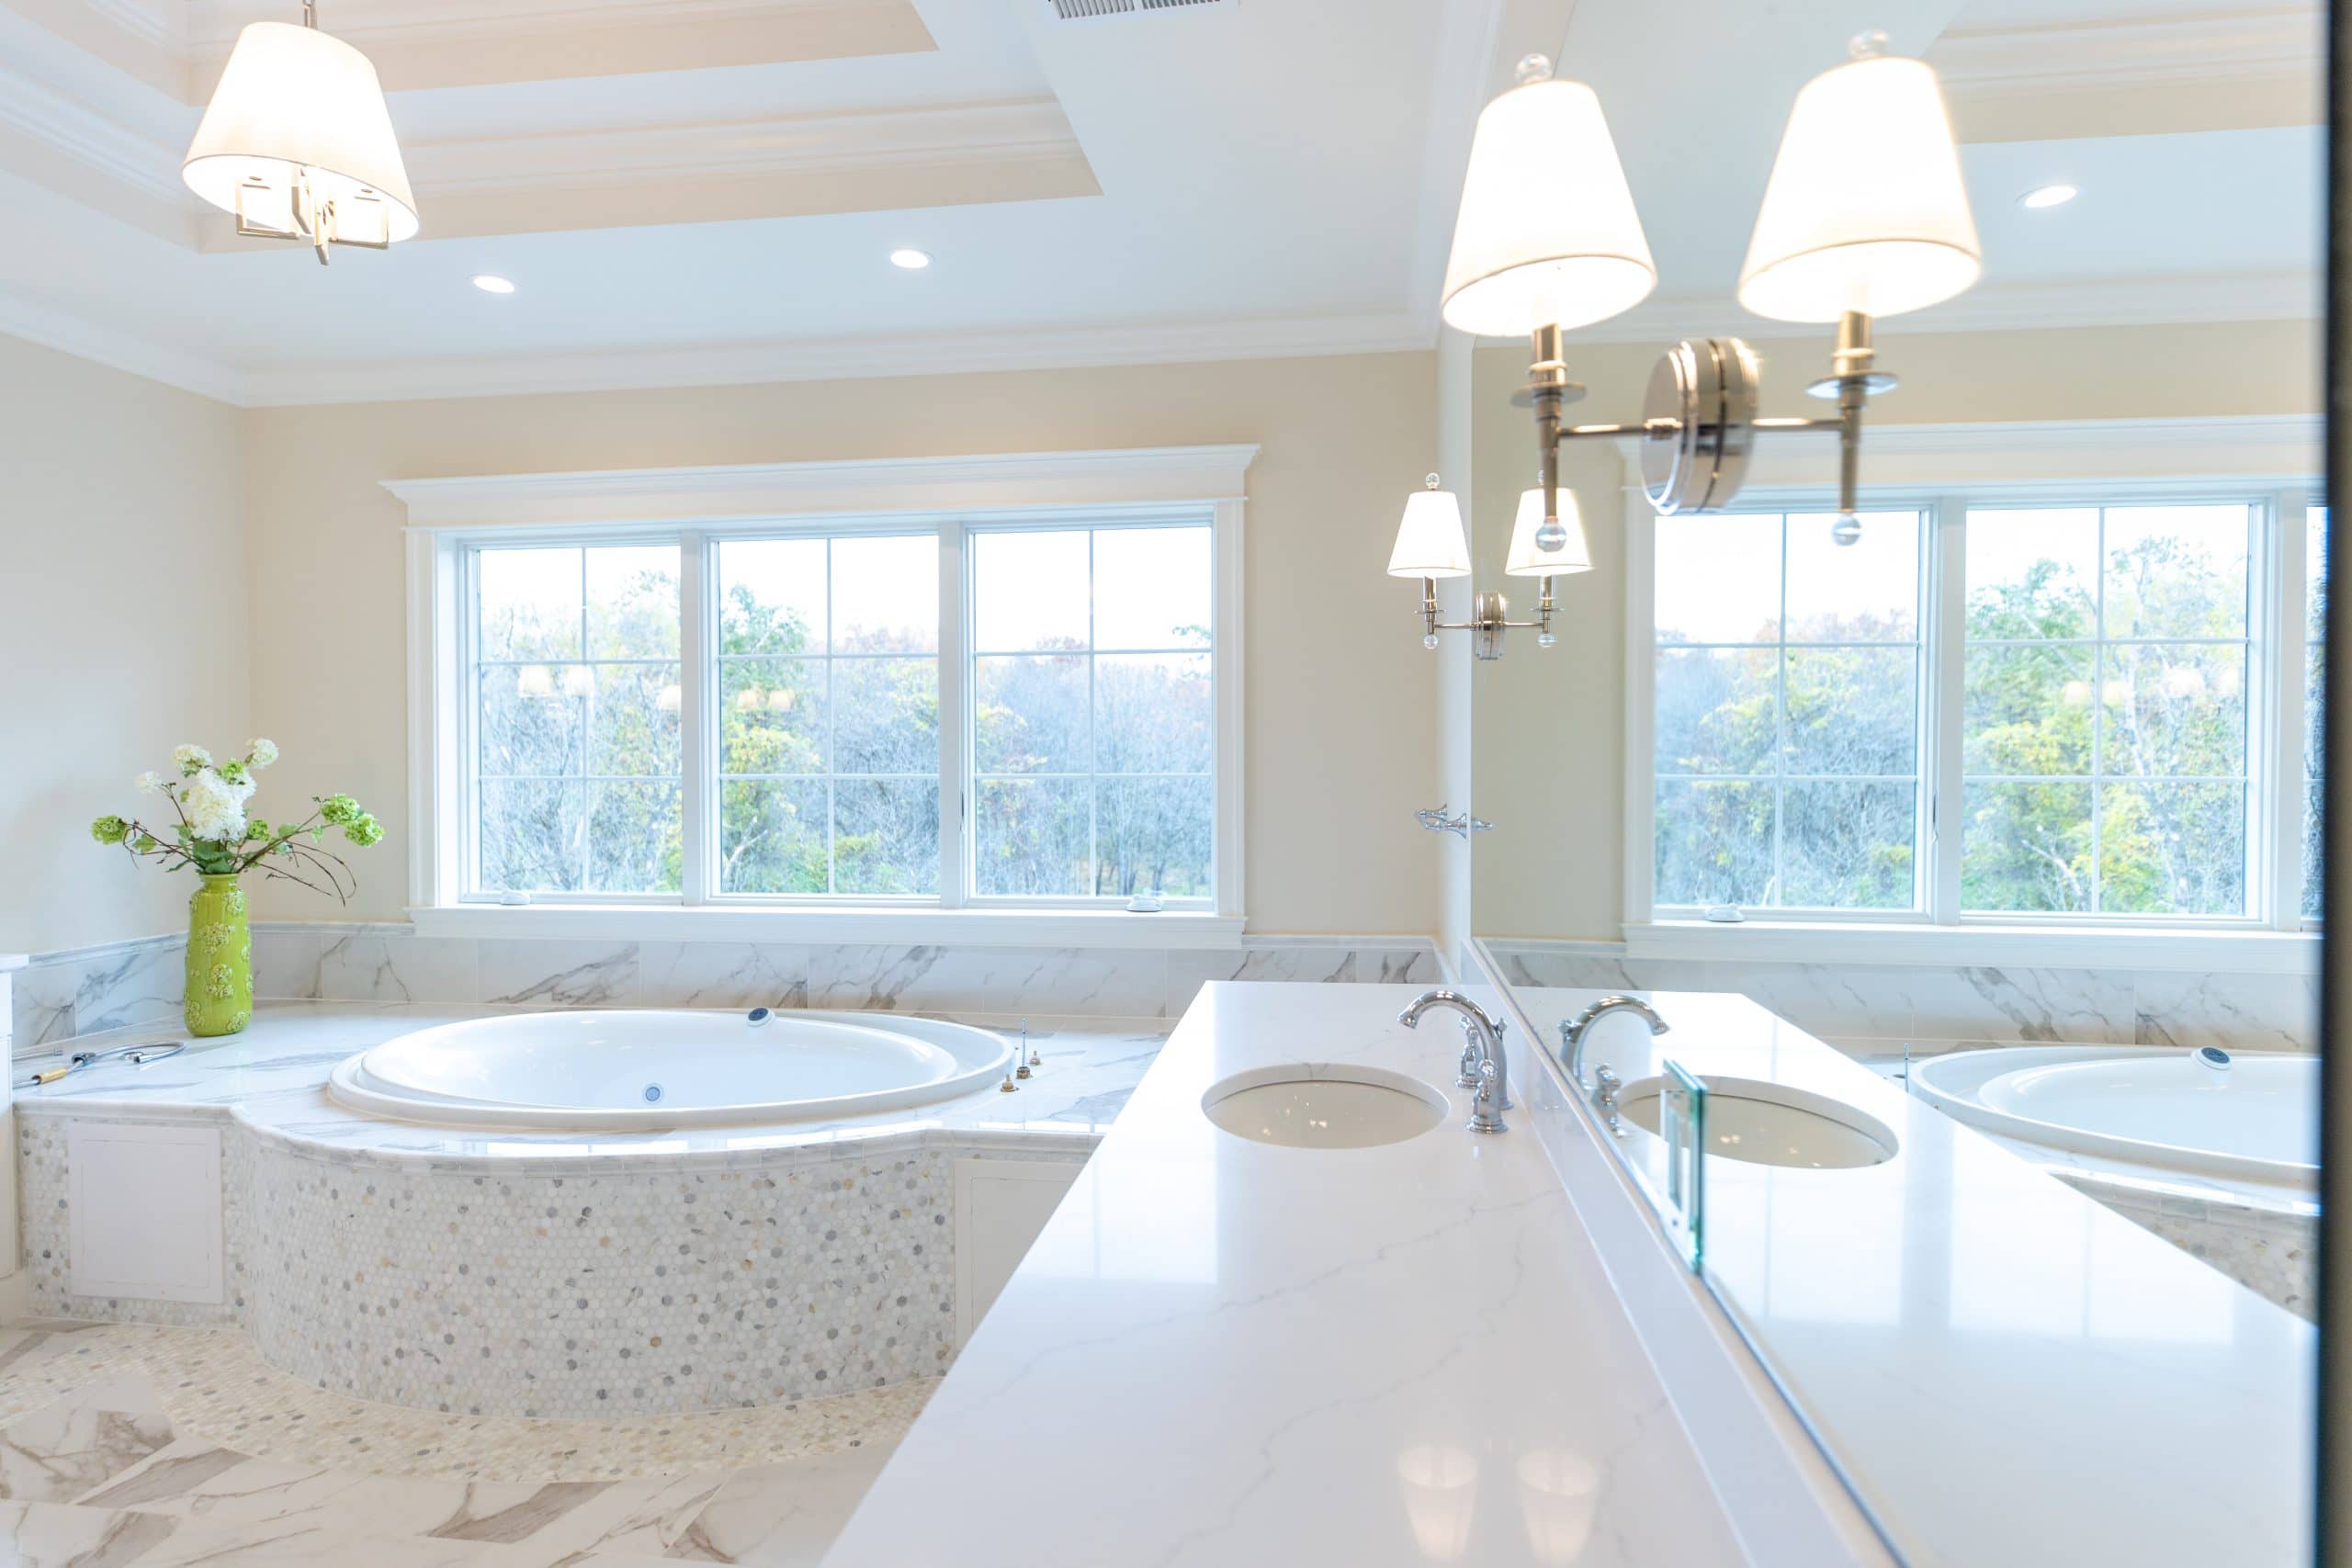 Bathroom Remodeling Process: Steps for a Seamless Remodel